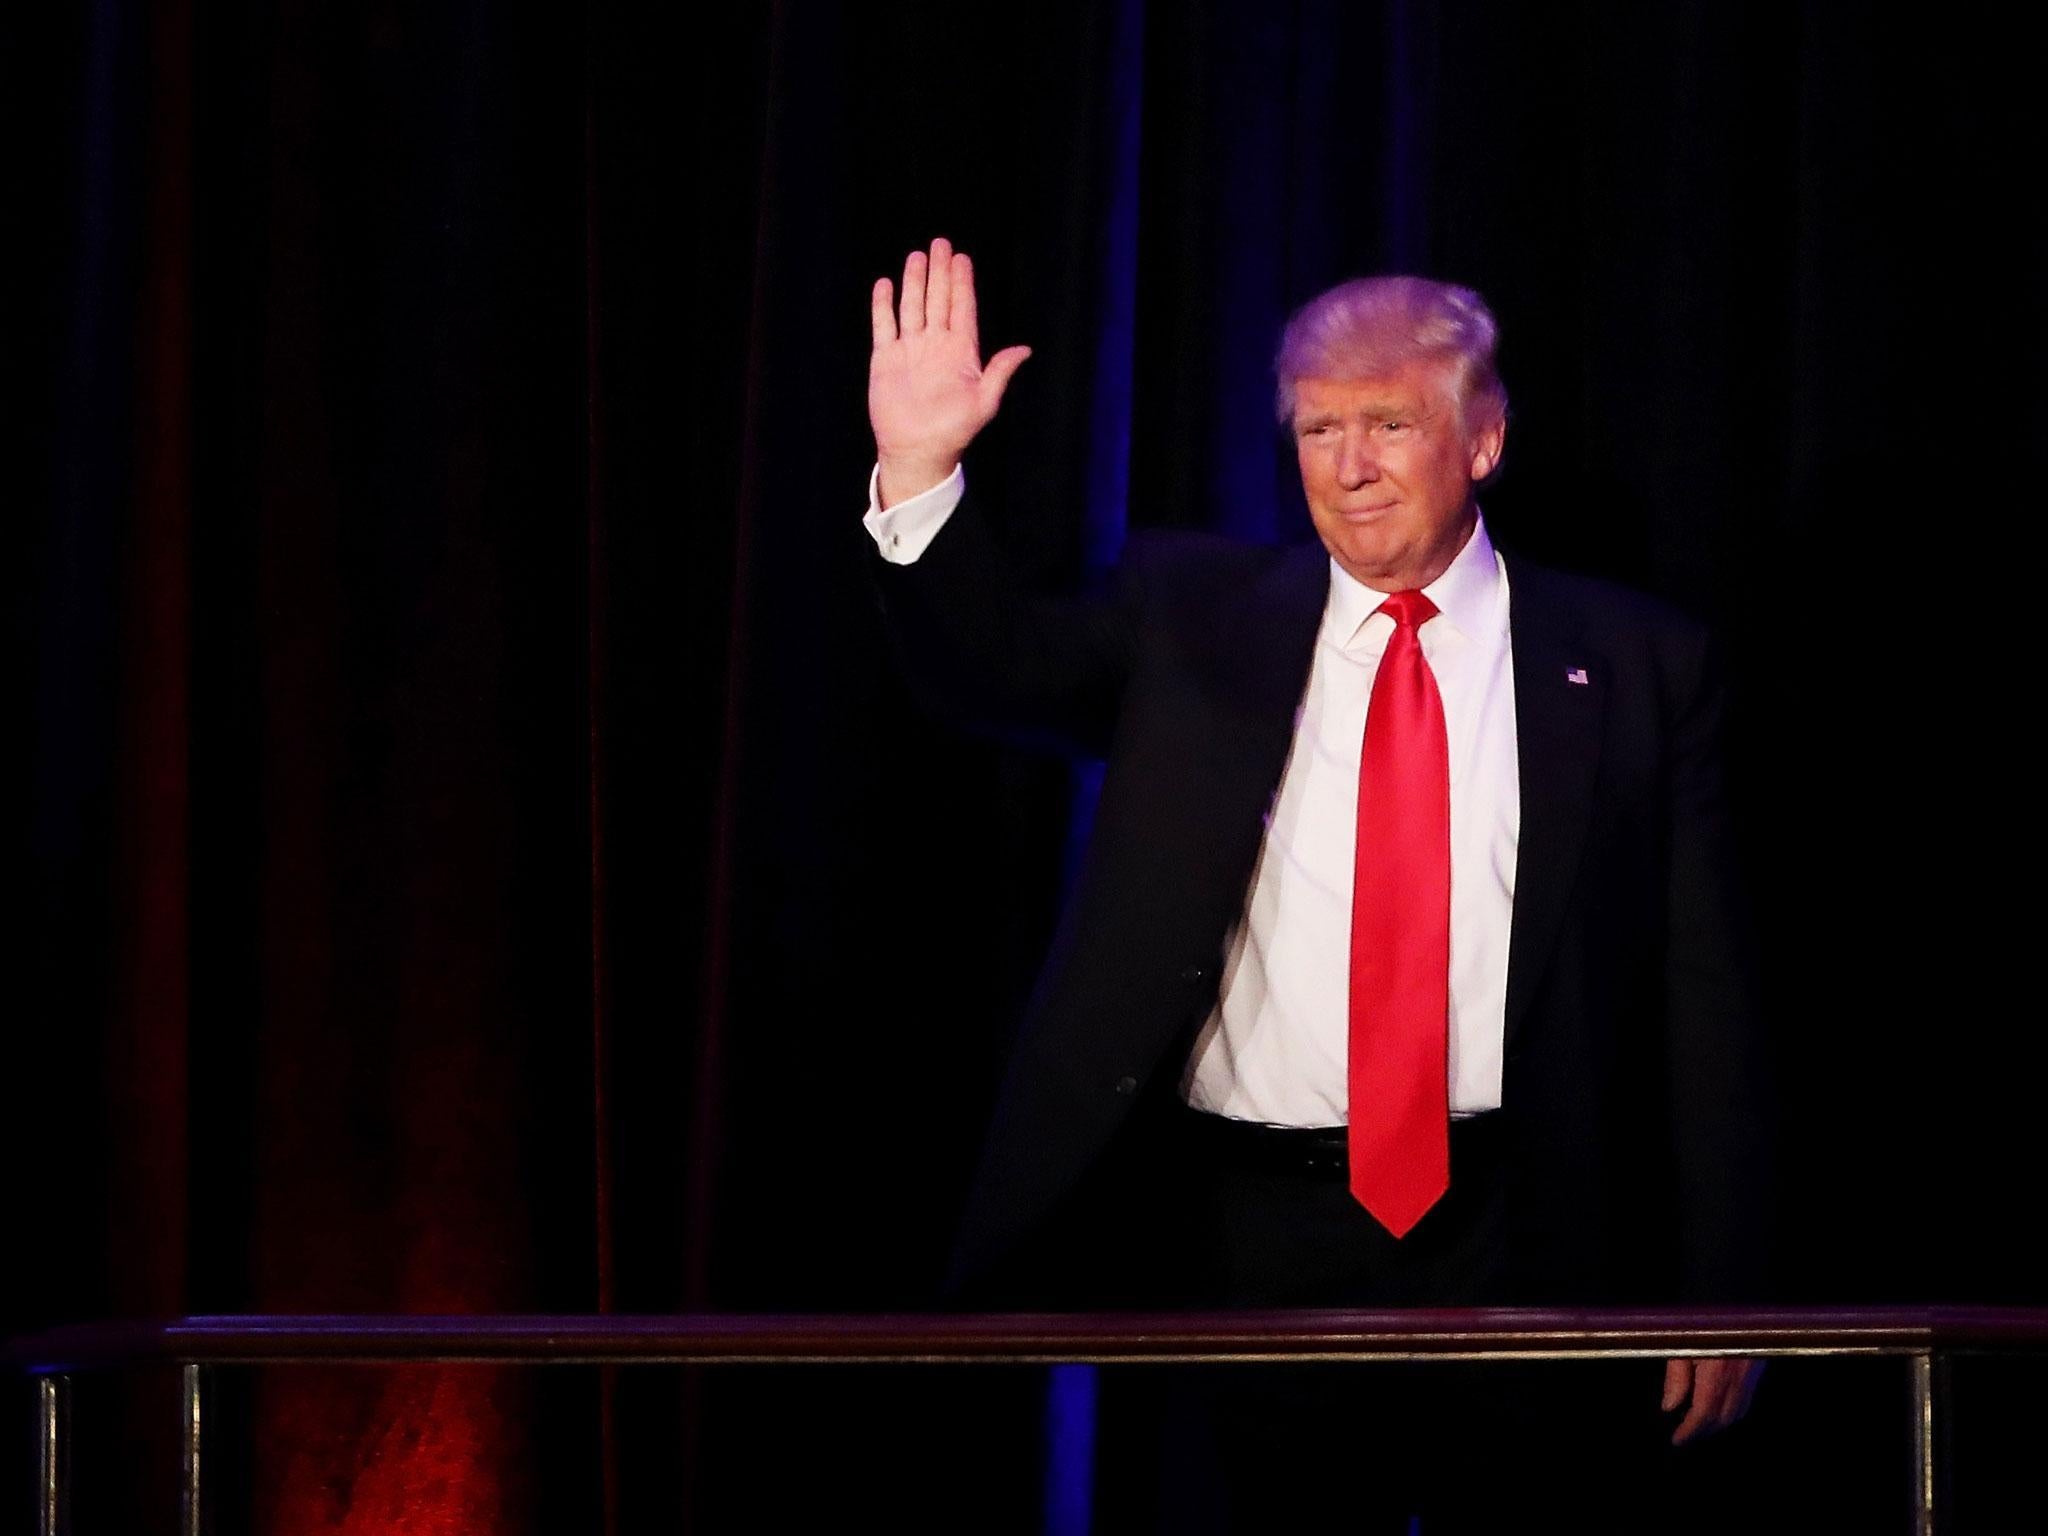 Trump waves to his supporters after Vice President-elect Mike Pence introduces him Getty